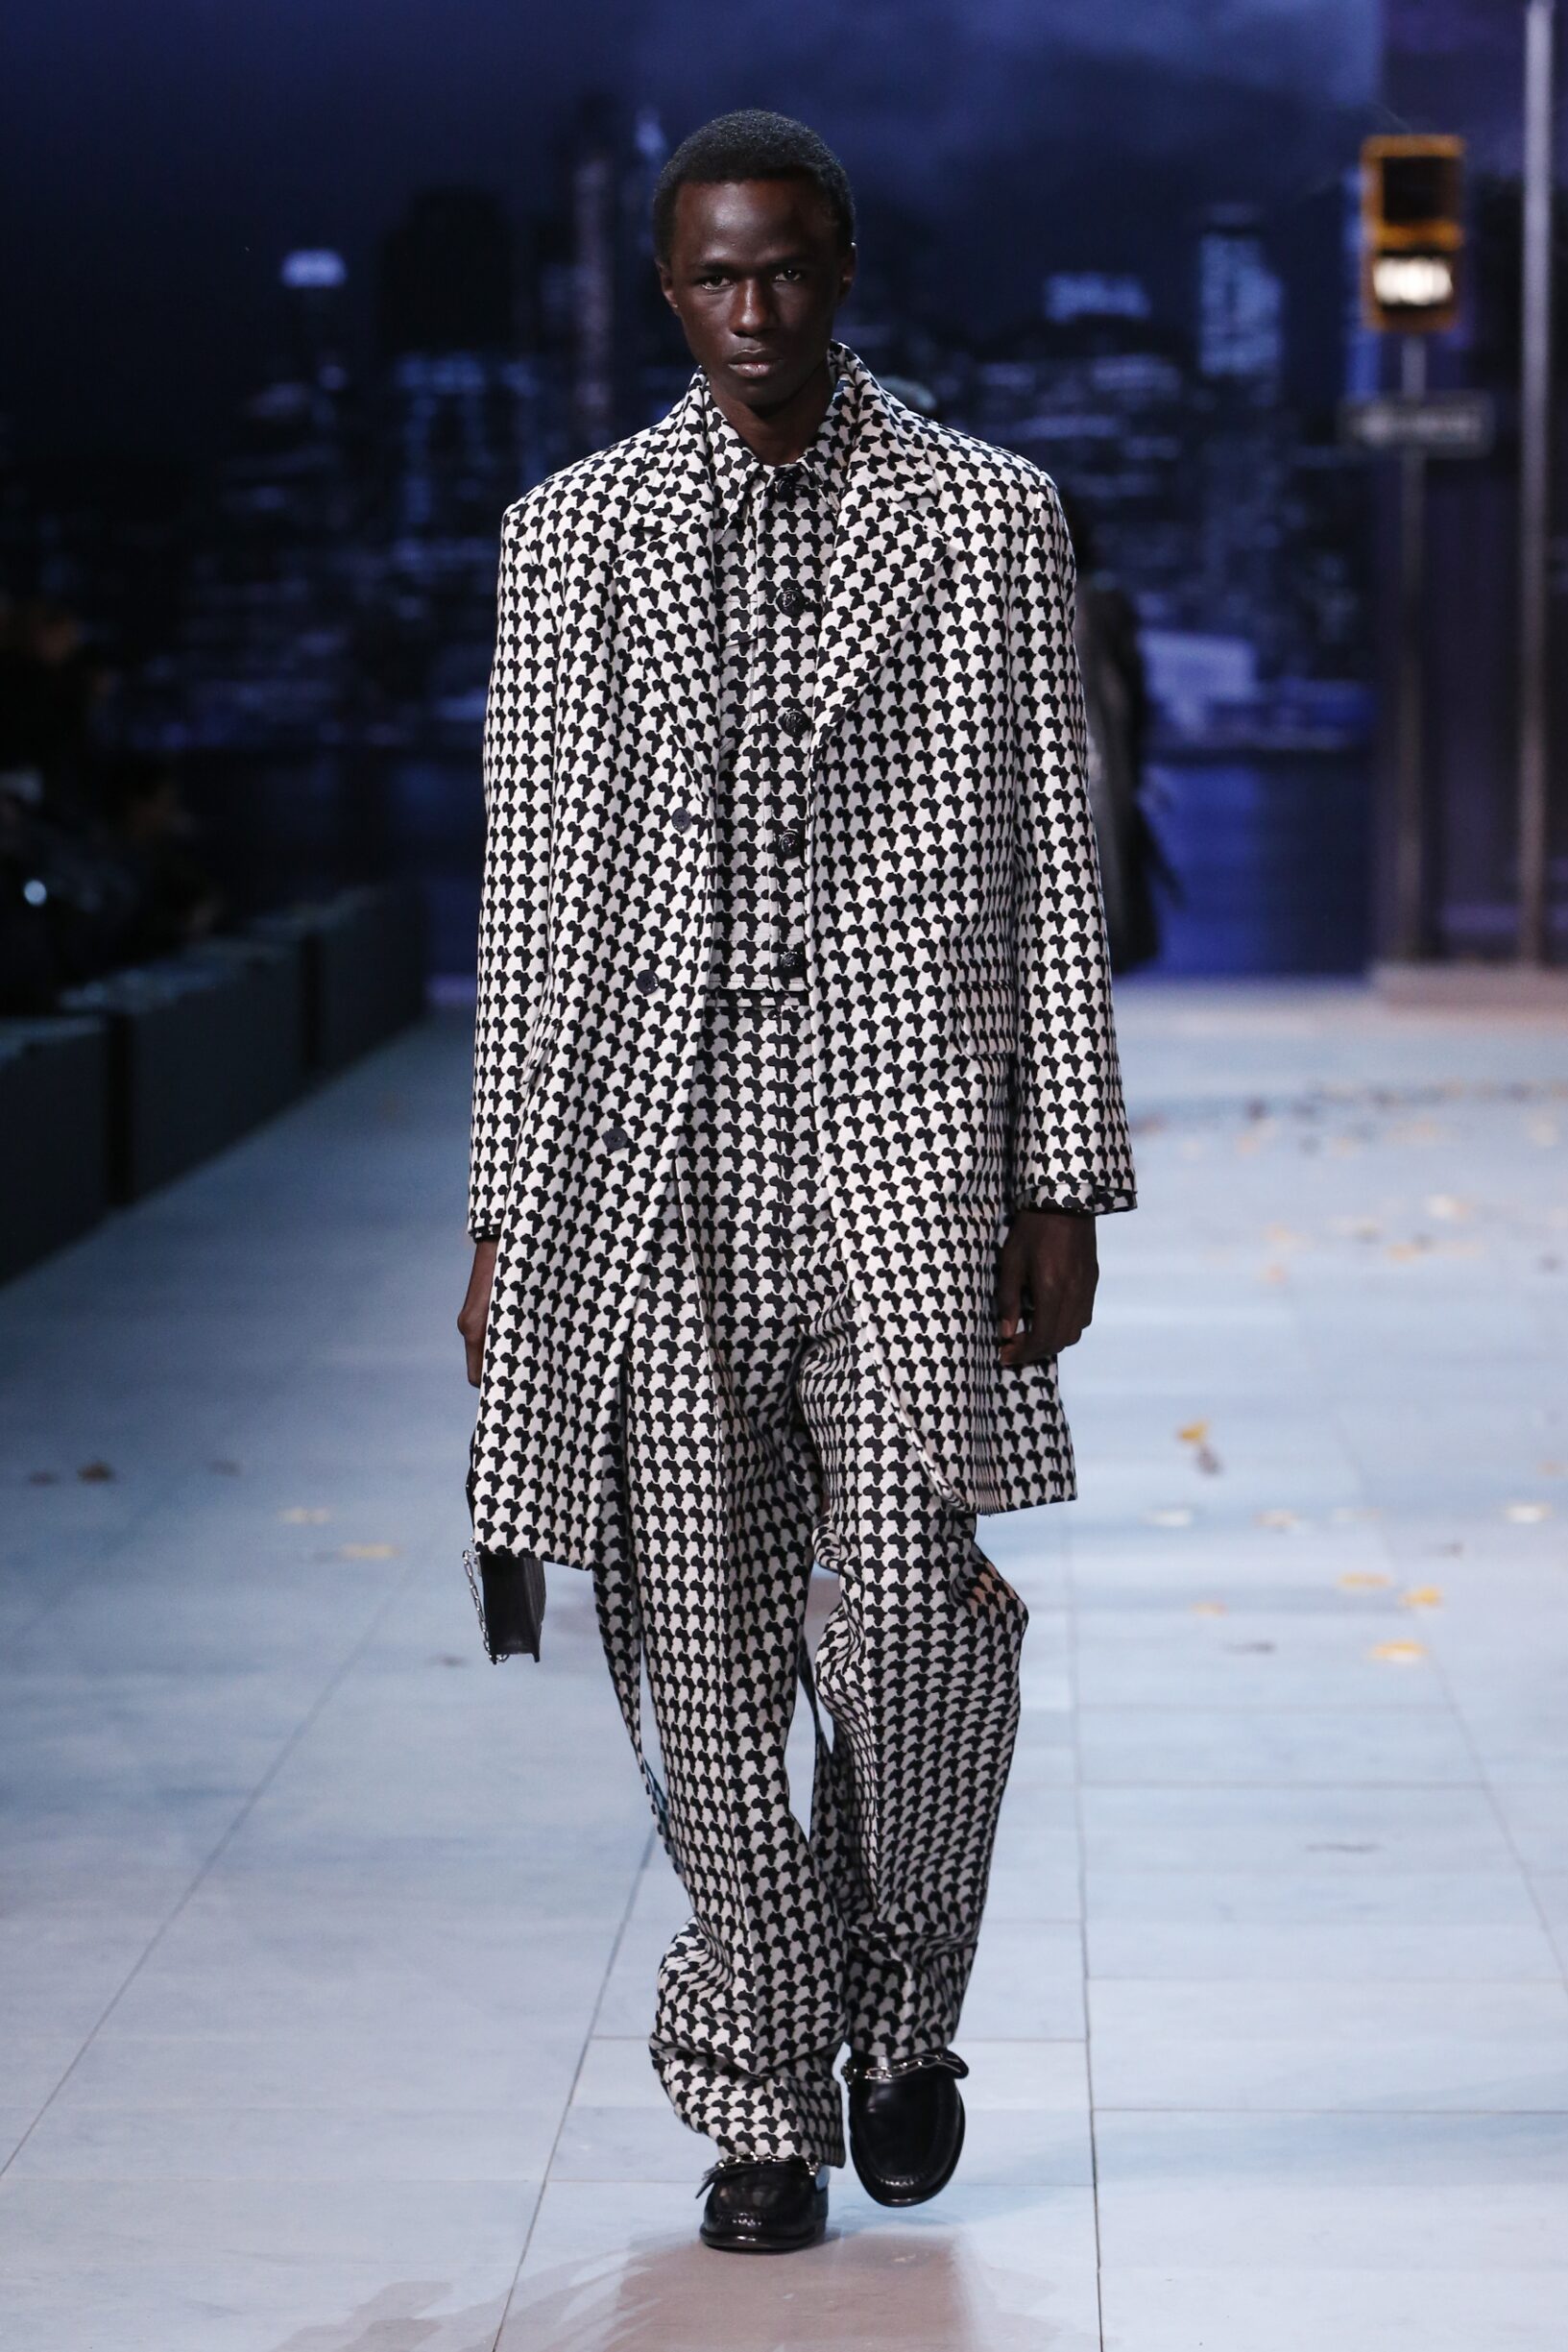 LOUIS VUITTON FALL WINTER 2019 MEN’S COLLECTION | The Skinny Beep